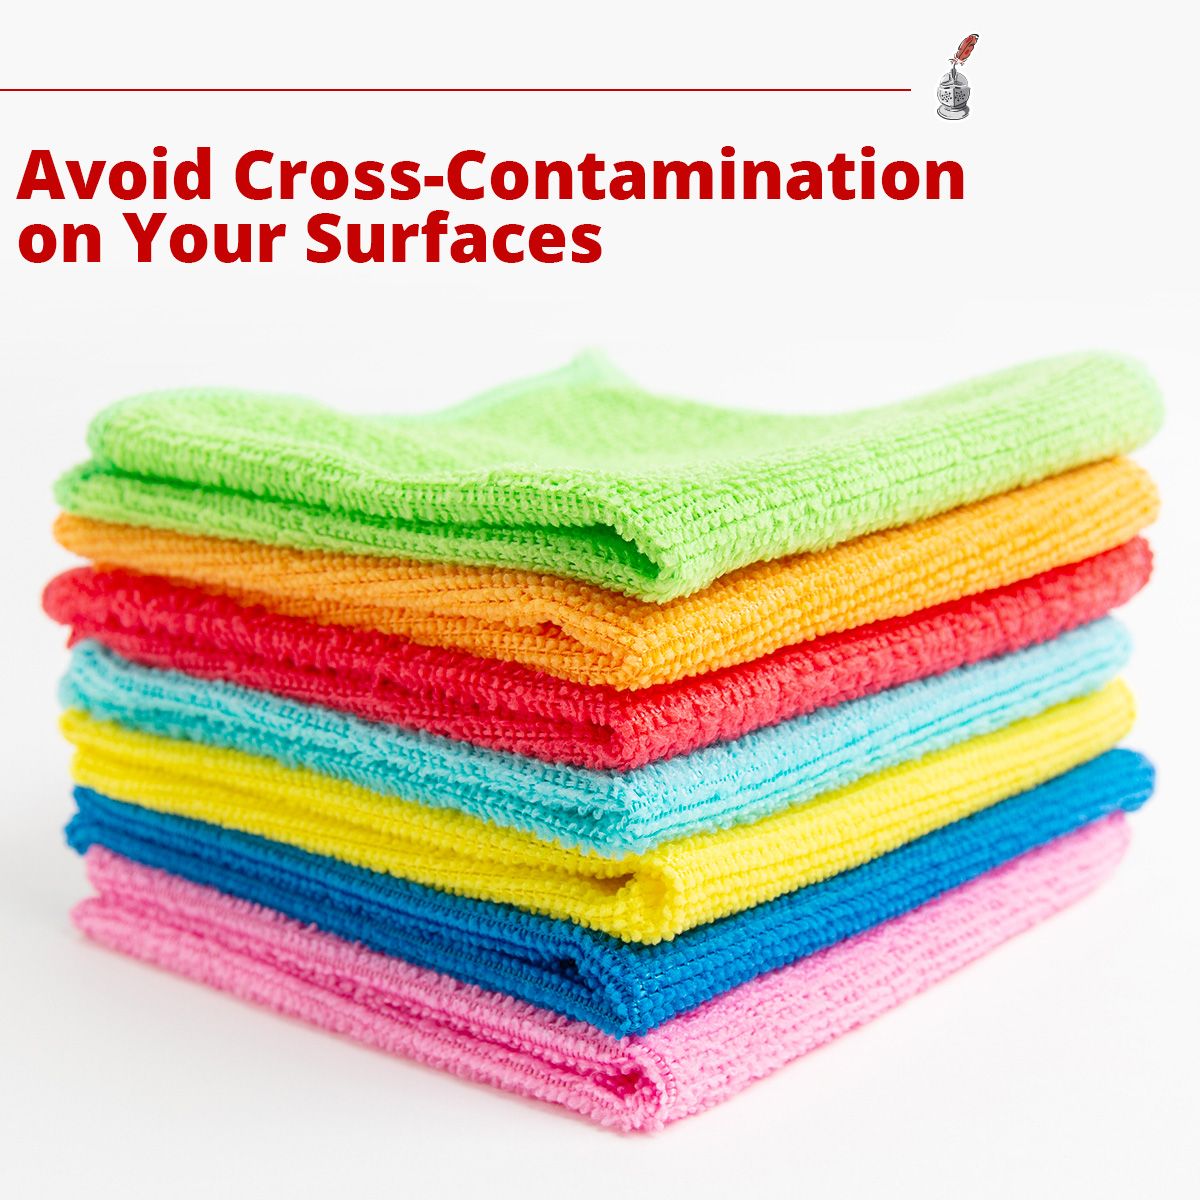 Avoid Cross-Contamination on Your Surfaces